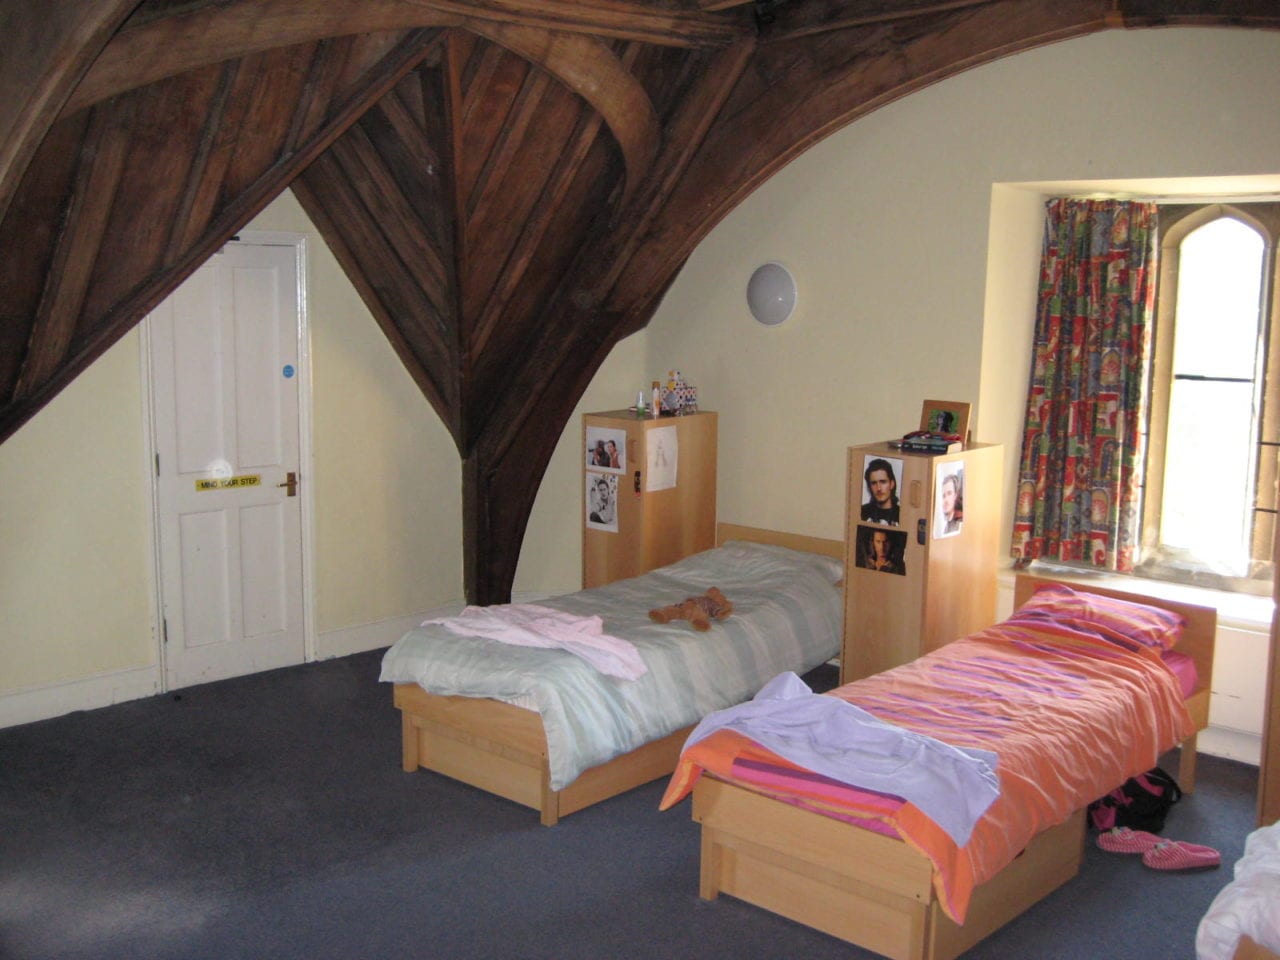 Two beds in a multi-bed room at King's Ely School, for Sir Edward residential English summer camp